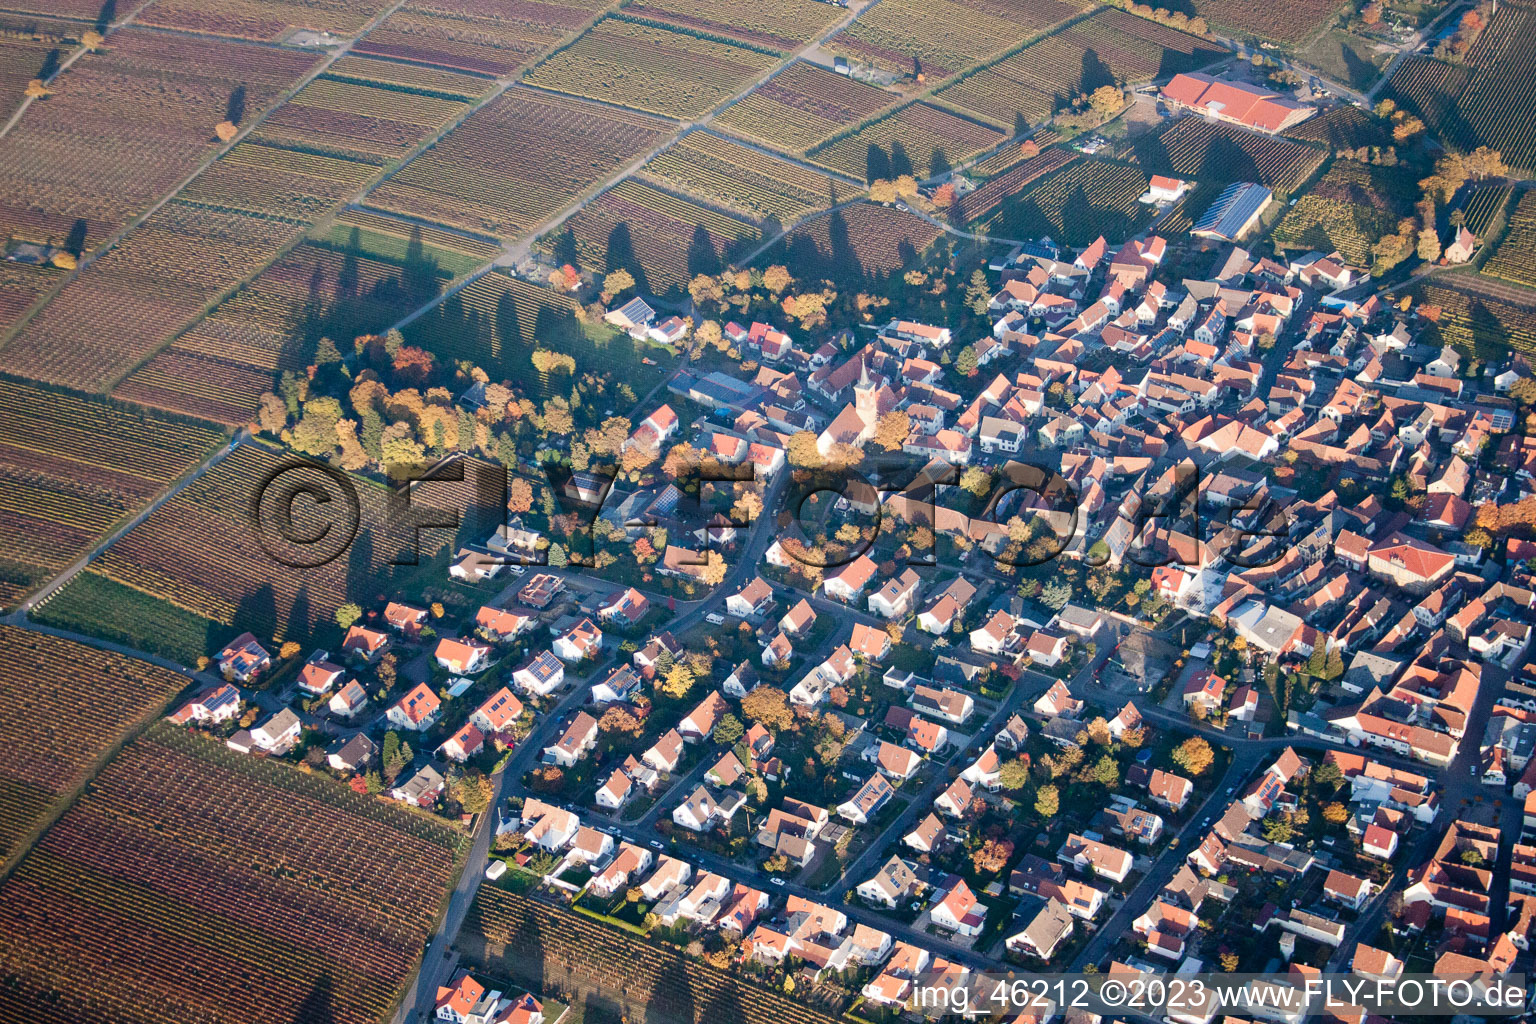 District Nußdorf in Landau in der Pfalz in the state Rhineland-Palatinate, Germany seen from above